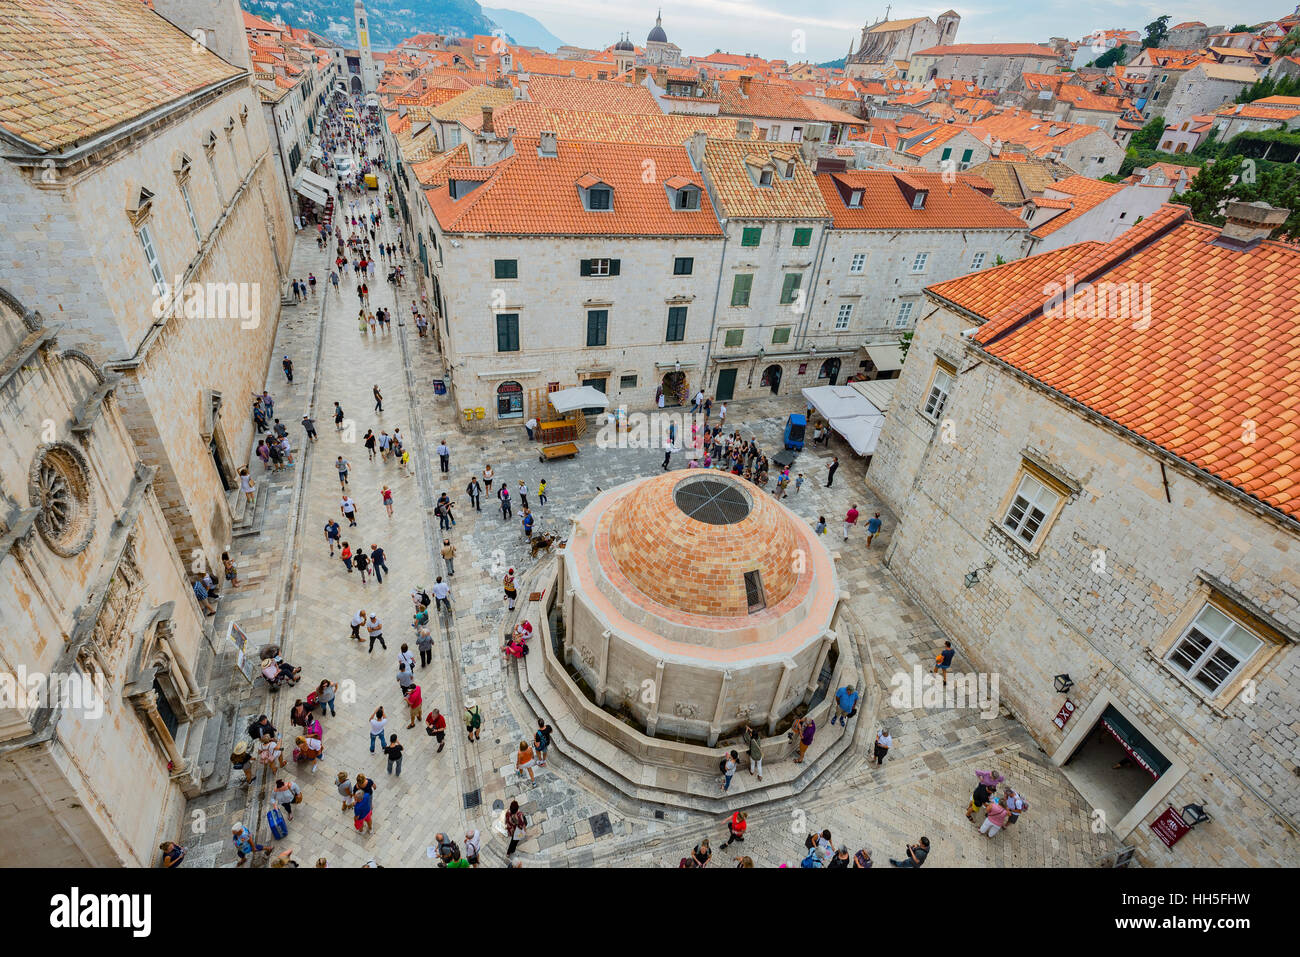 Birdseye view of Dubrovnik's Old City square taken from the top of the ancient wall surrounding the city. Stock Photo